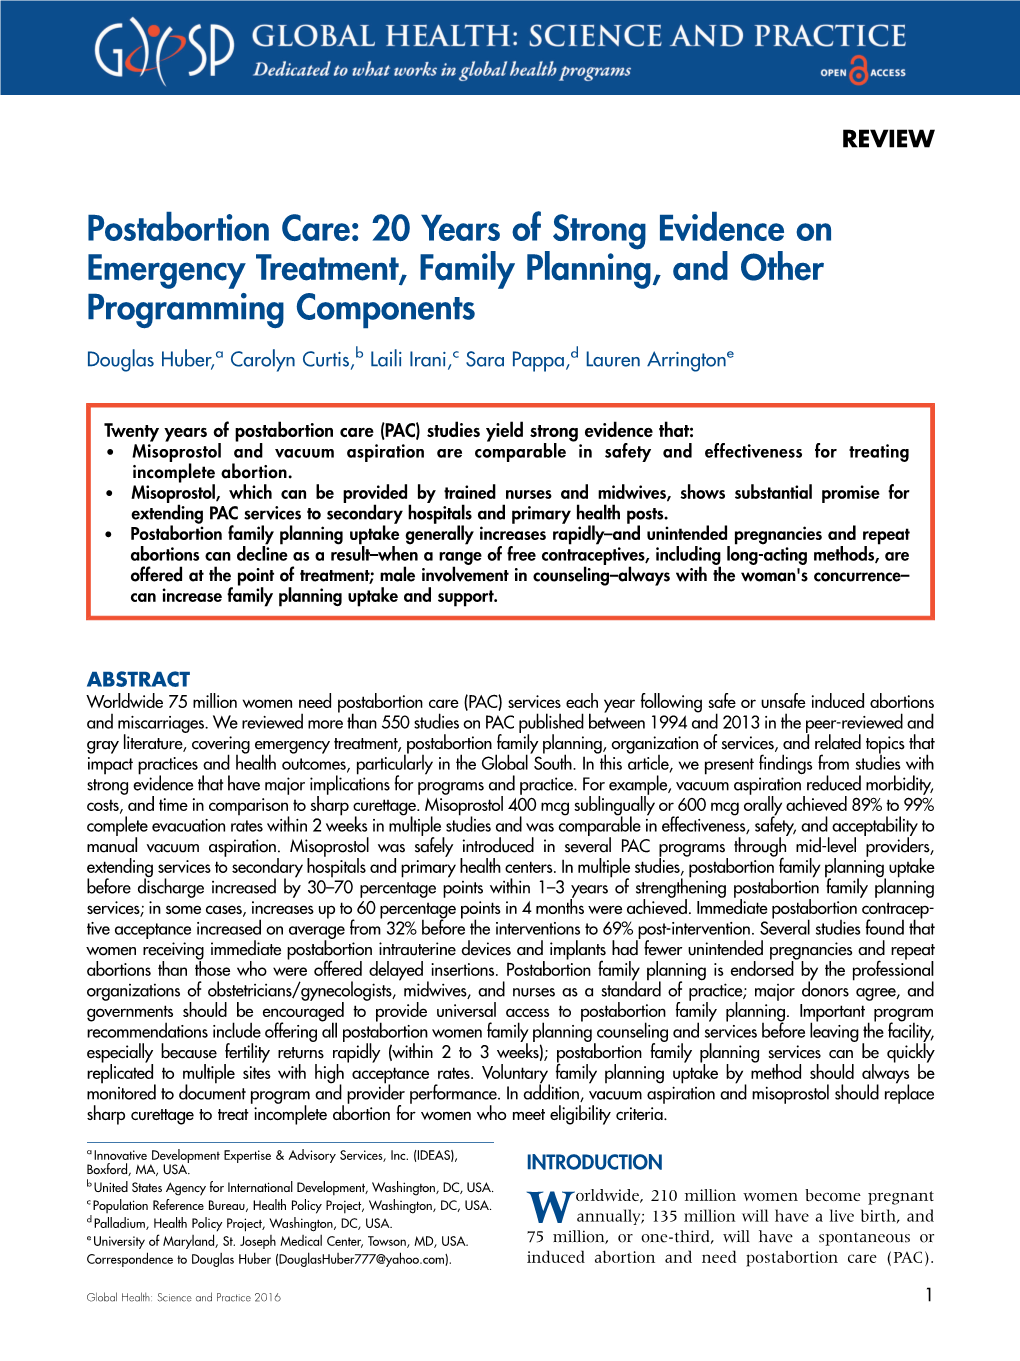 Postabortion Care: 20 Years of Strong Evidence on Emergency Treatment, Family Planning, and Other Programming Components